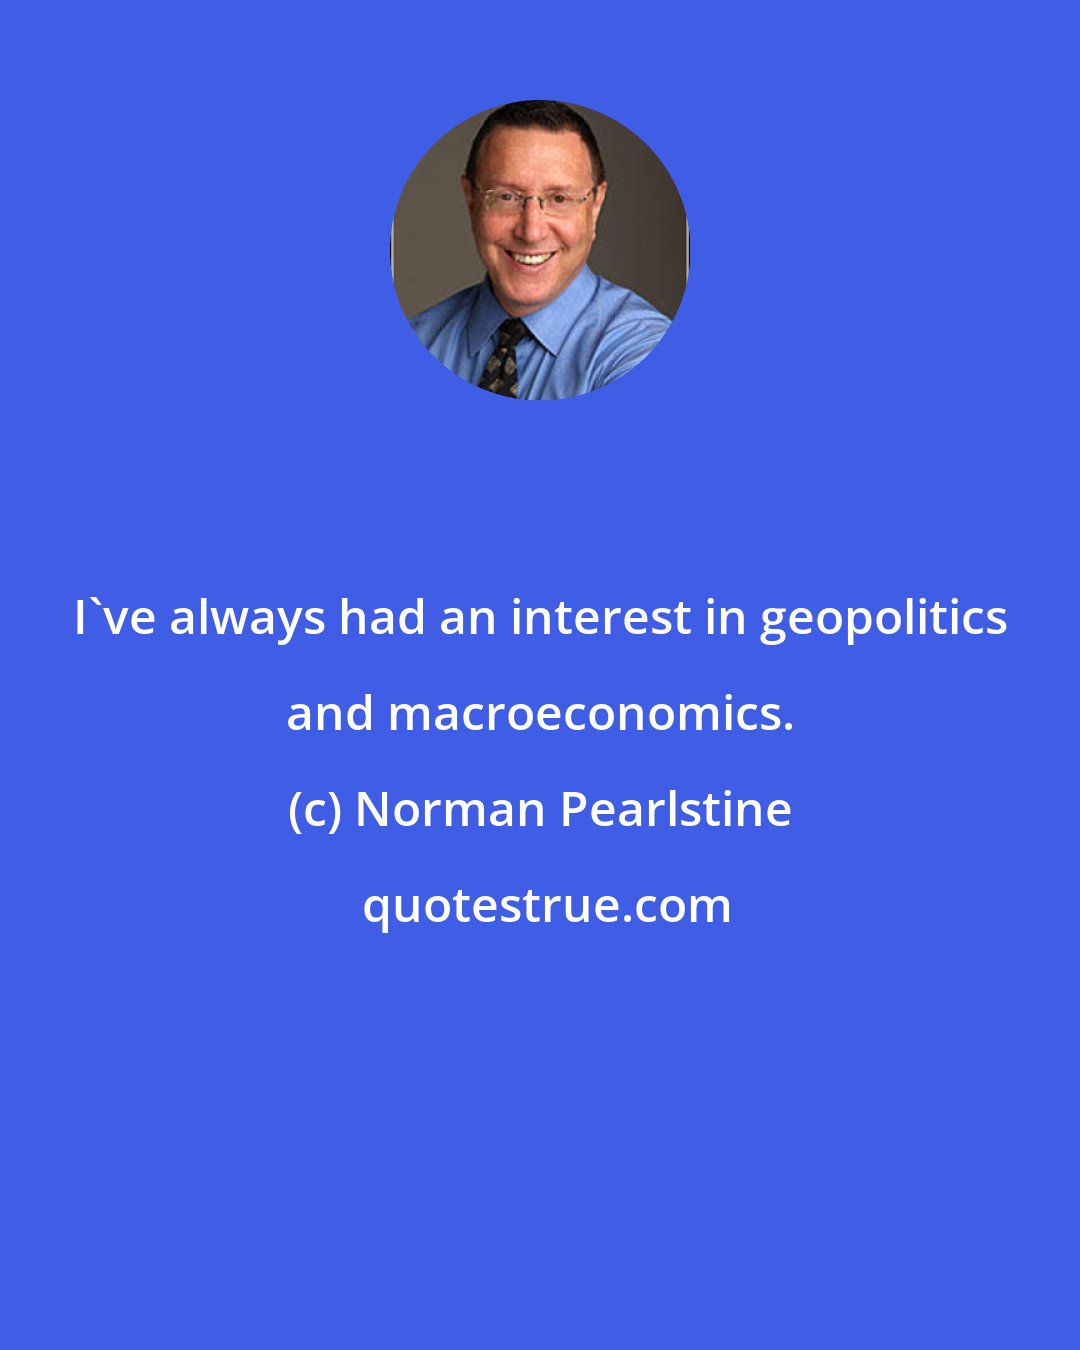 Norman Pearlstine: I've always had an interest in geopolitics and macroeconomics.